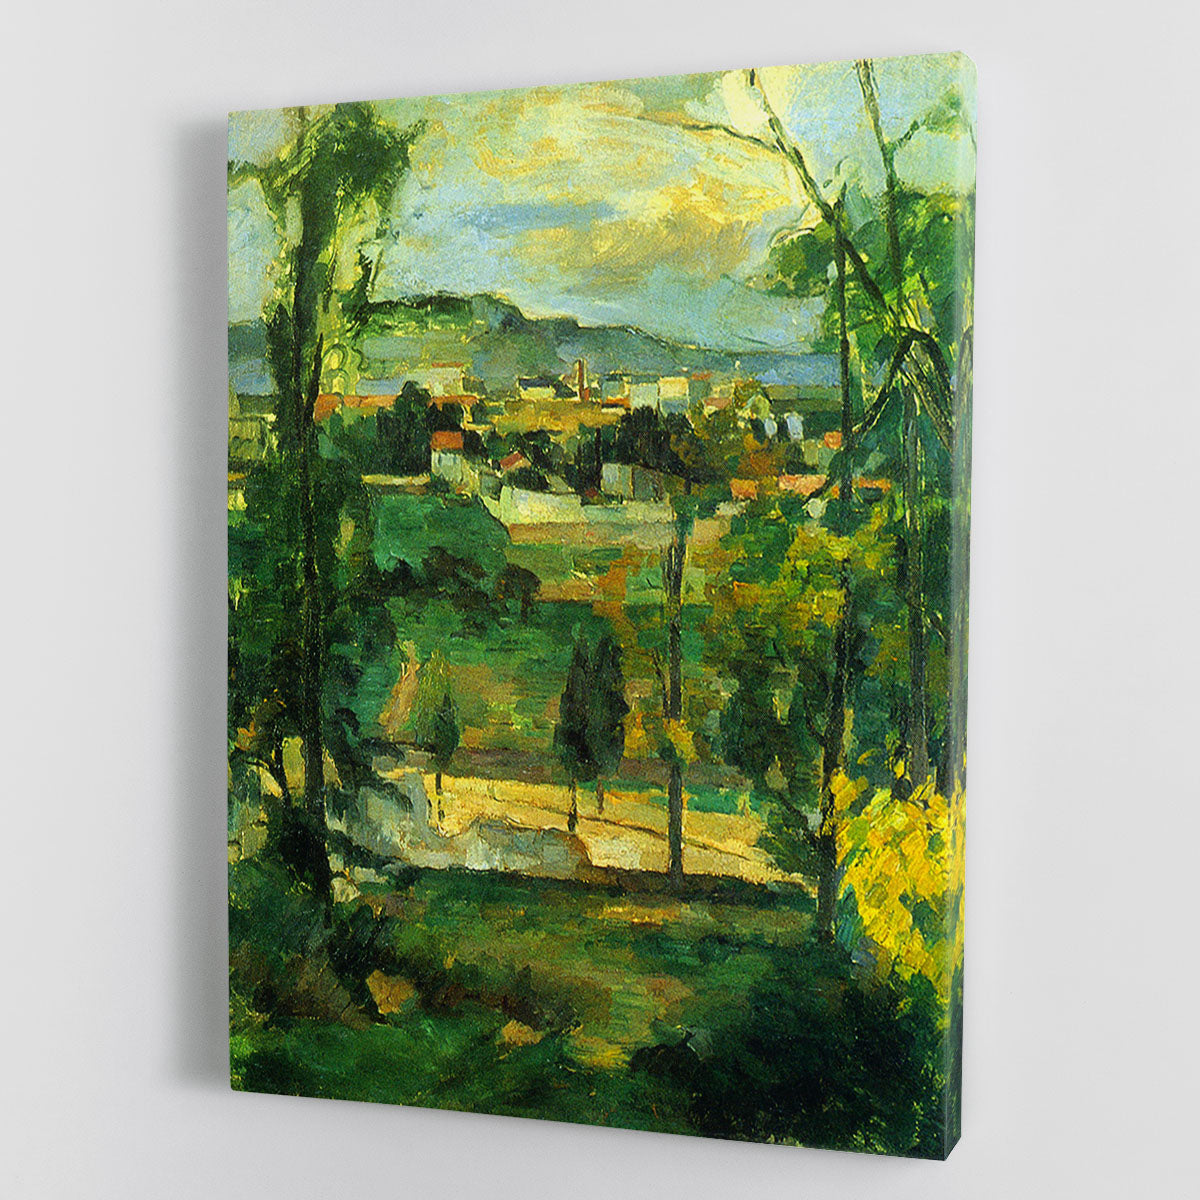 Village behind the trees Ile de France by Cezanne Canvas Print or Poster - Canvas Art Rocks - 1